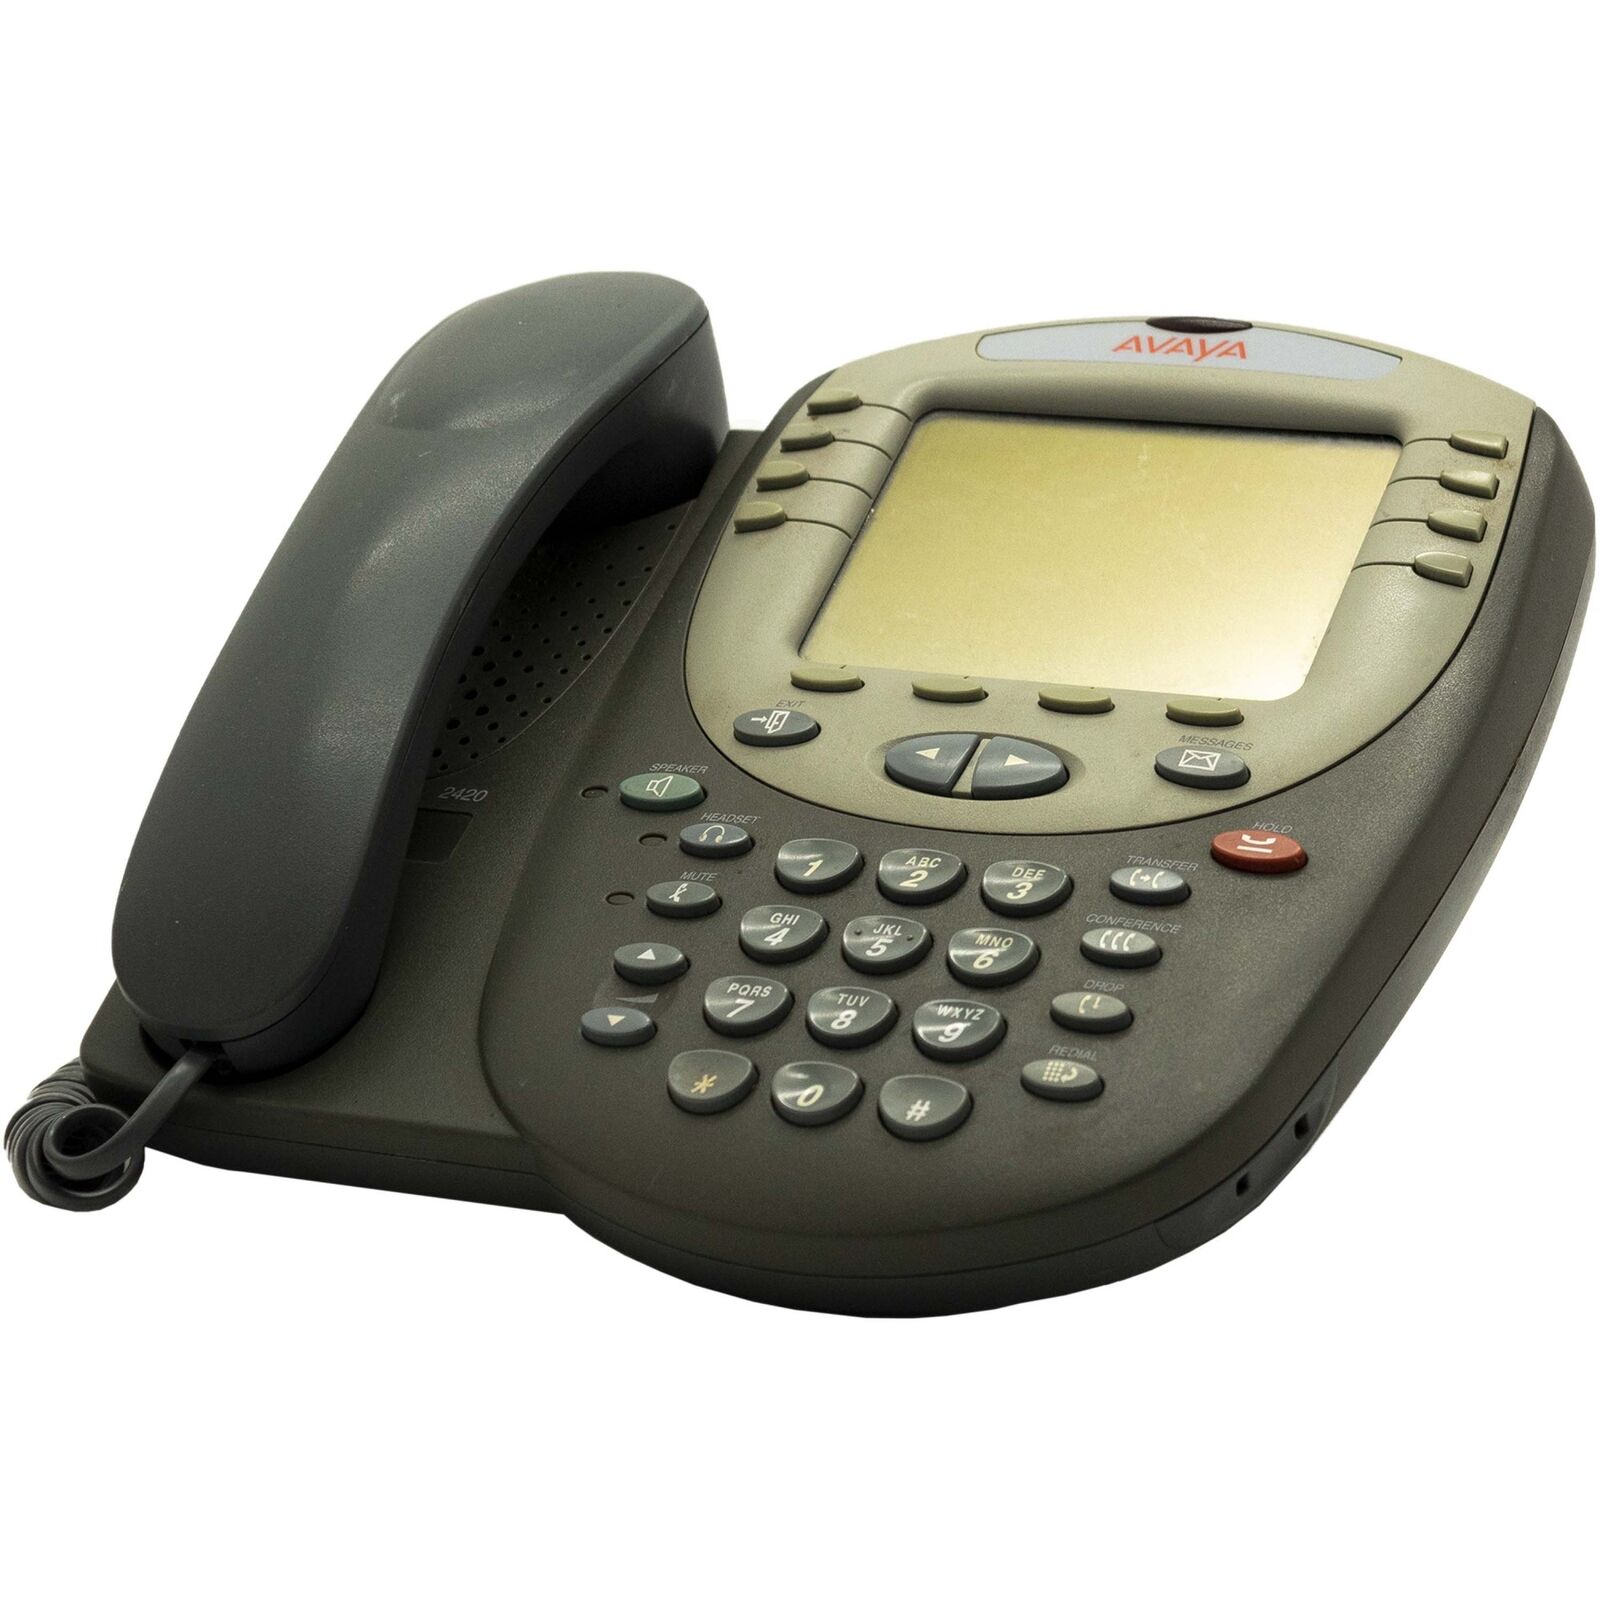 Avaya 2420 700381585 IP Phone Poe Business Office A Co [ Reconditioned